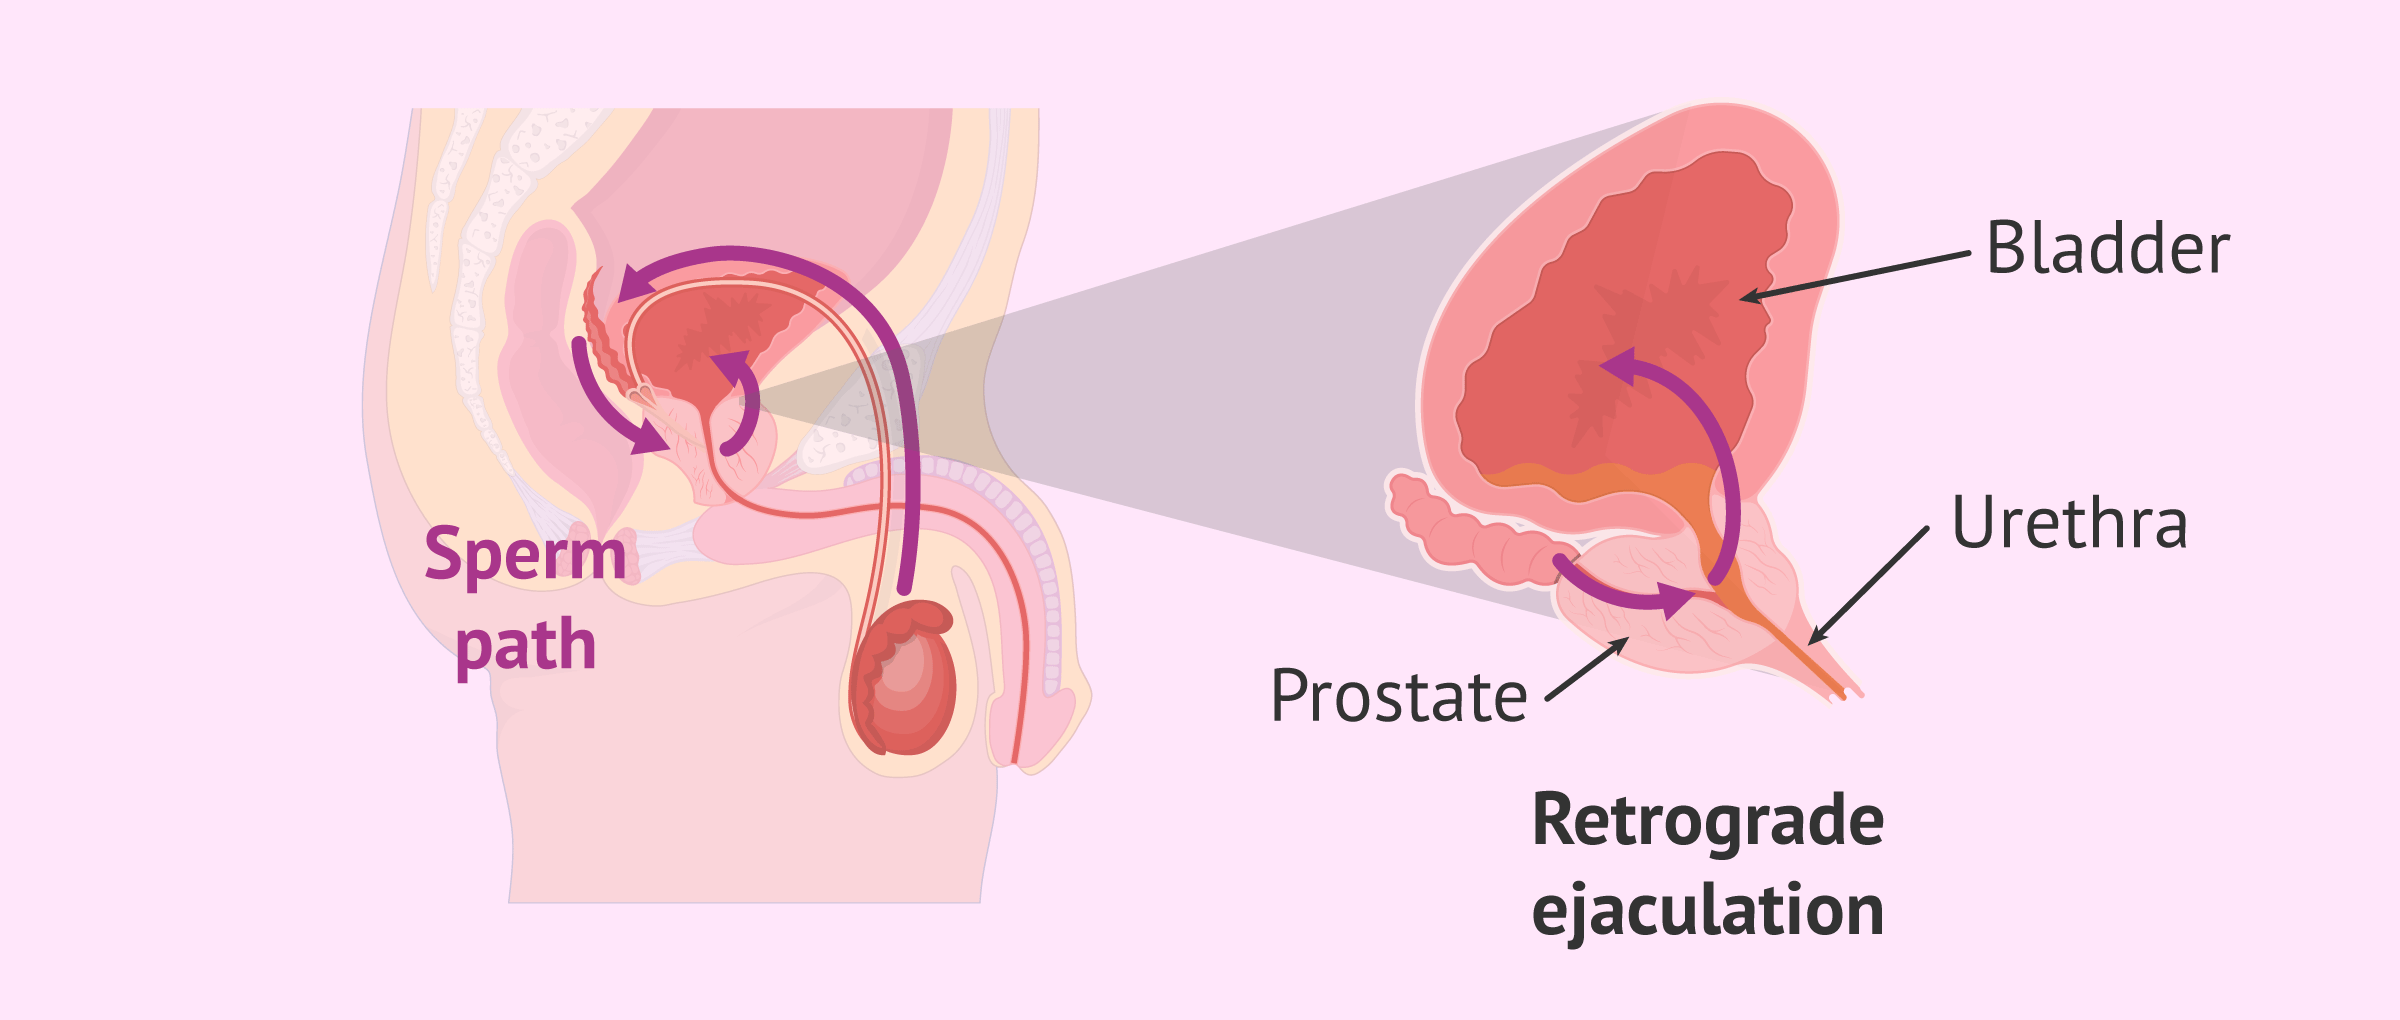 What does retrograde ejaculation look like?